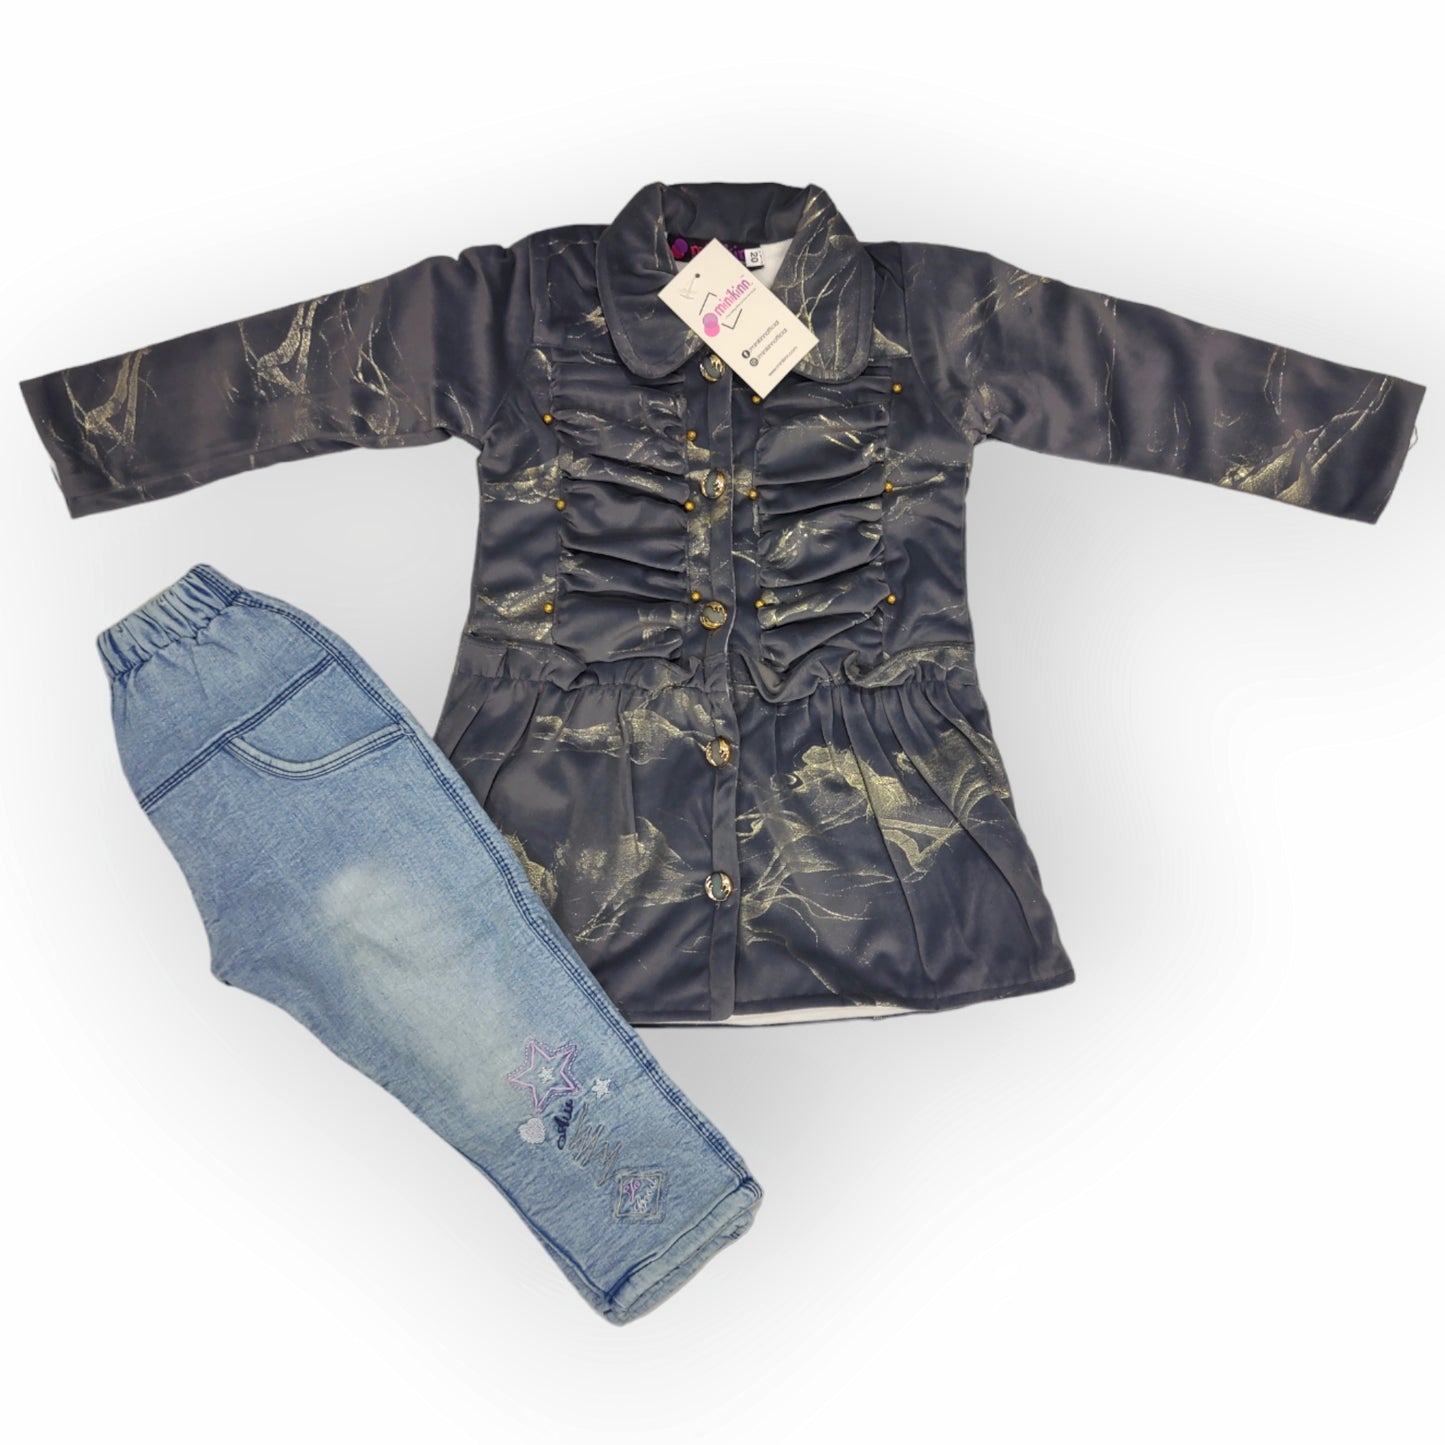 Girls Imported Laminated Marble Velour Fleece Jacket with Embroidered Denim Fleece Pants Complete Suit - 2 Piece Set (Gvl-V5-2042)